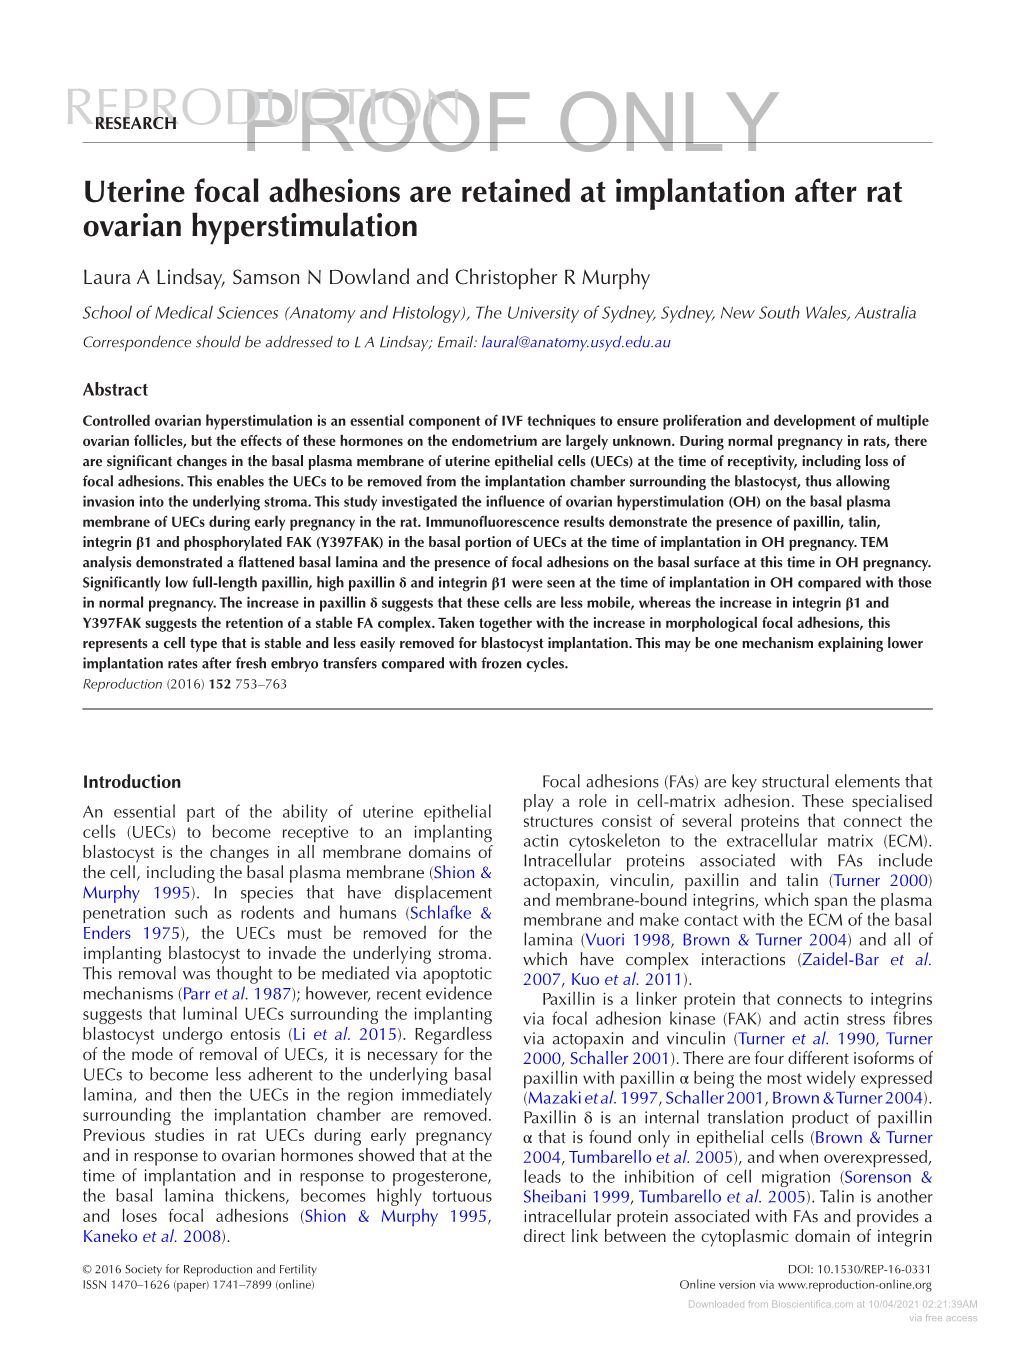 Uterine Focal Adhesions Are Retained at Implantation After Rat Ovarian Hyperstimulation